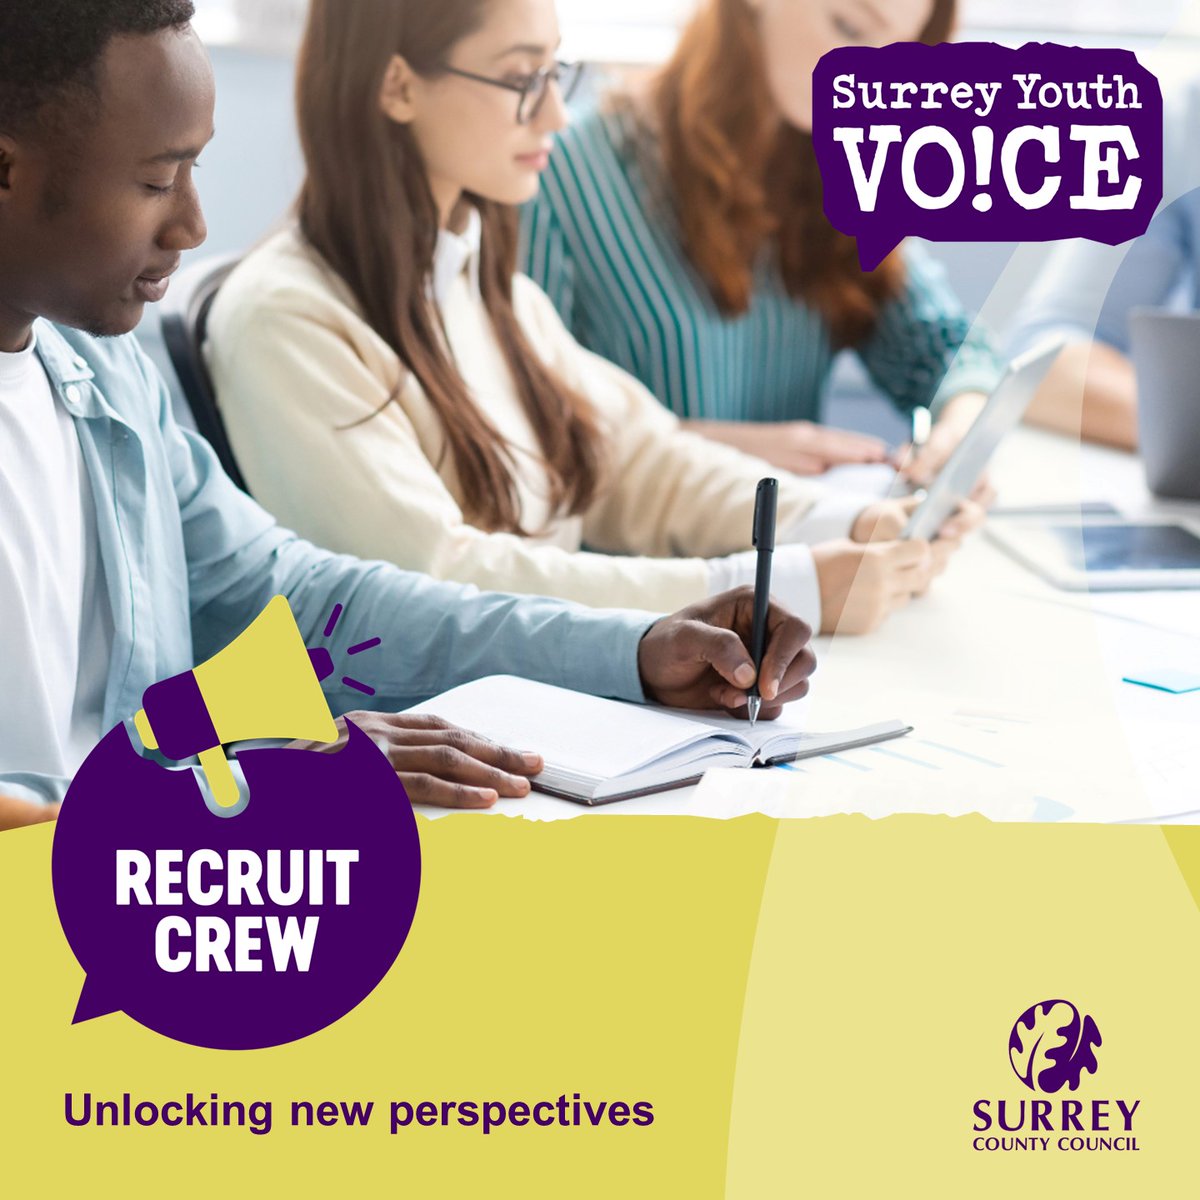 Are you aged 16-25 and seeking fun, flexible work? Join our Recruit Crew and: 👉 be part of a dynamic team recruiting staff for Surrey projects 👉 get training 👉 interview candidates 👉 earn incentives Email user.voice@surreycc.gov.uk to learn more about joining the crew!